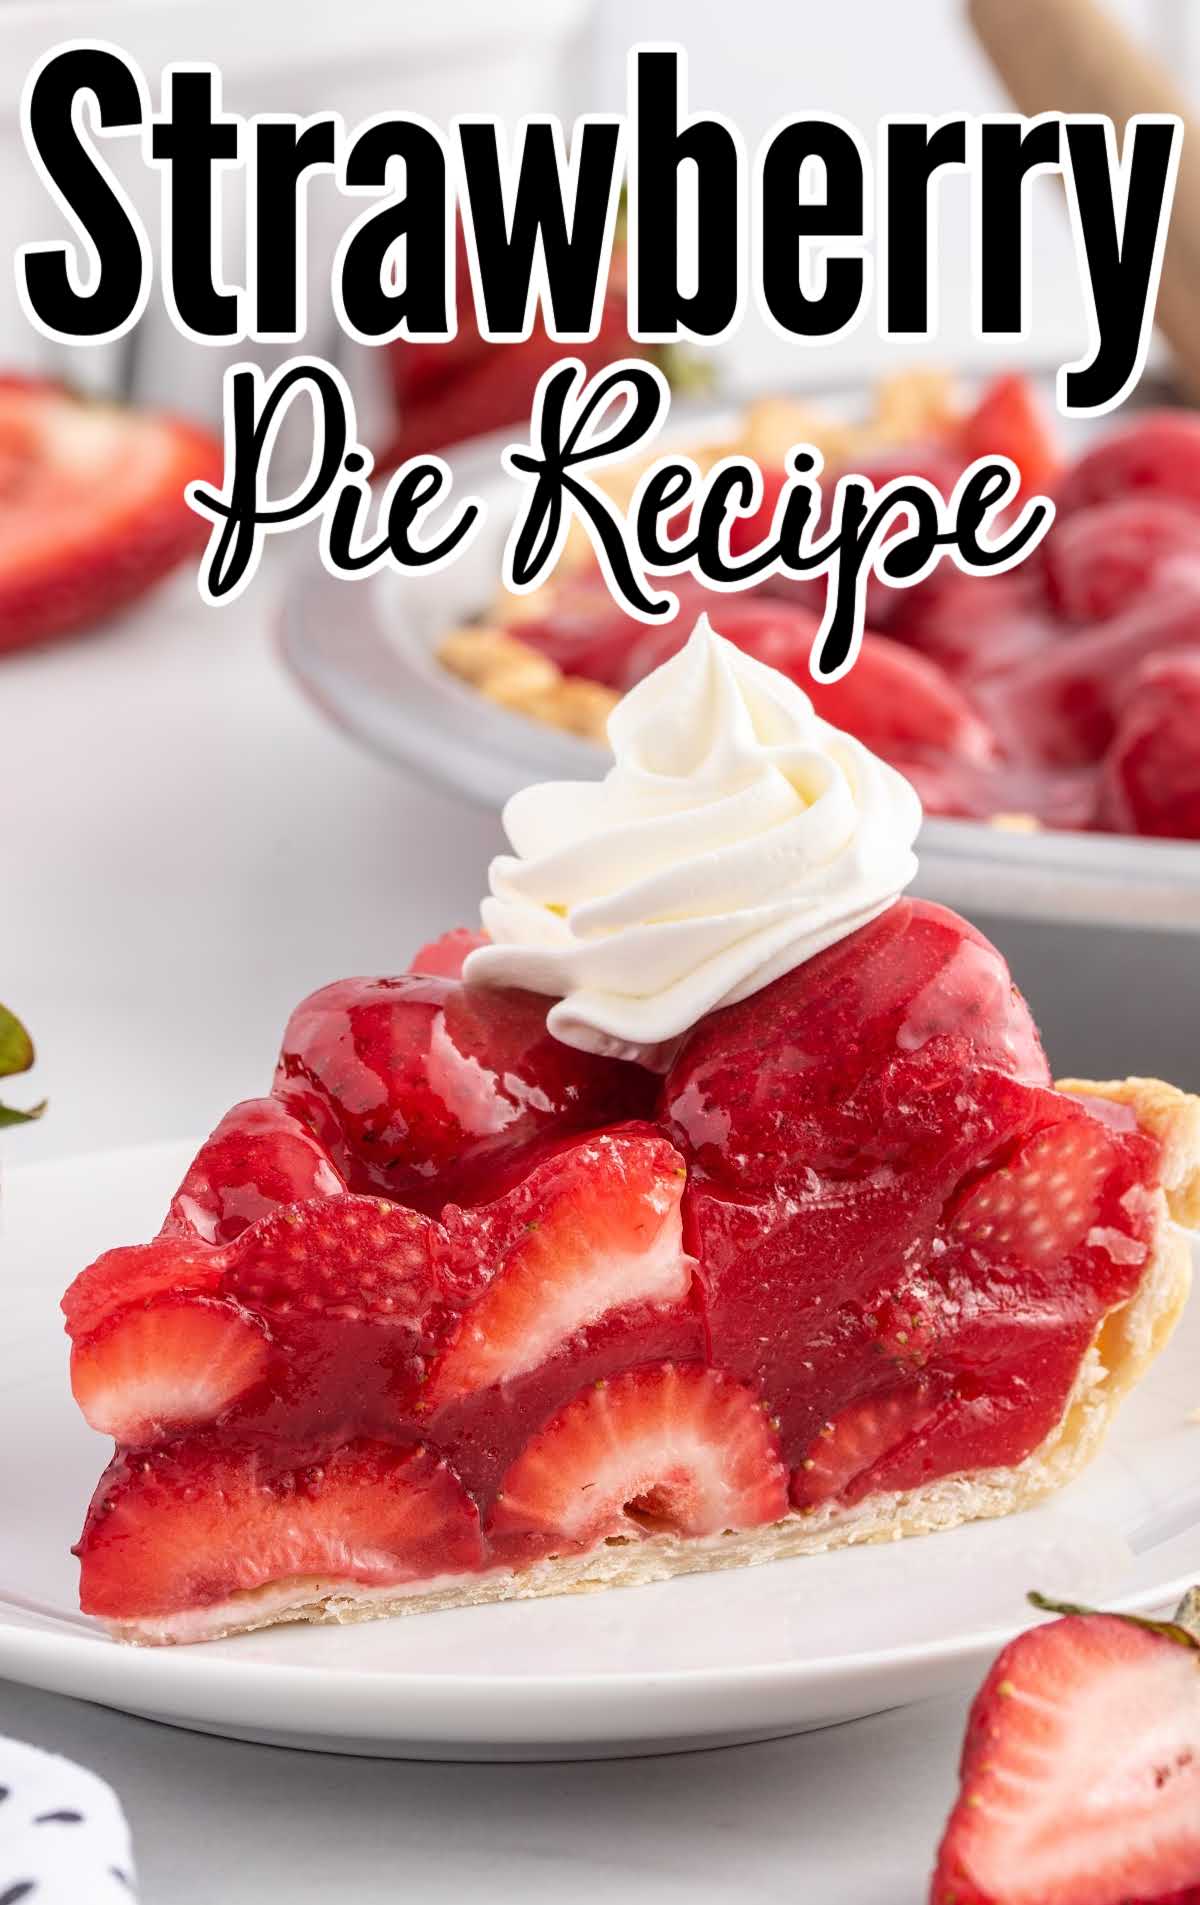 A slice of cake on a plate, with Pie and Strawberry